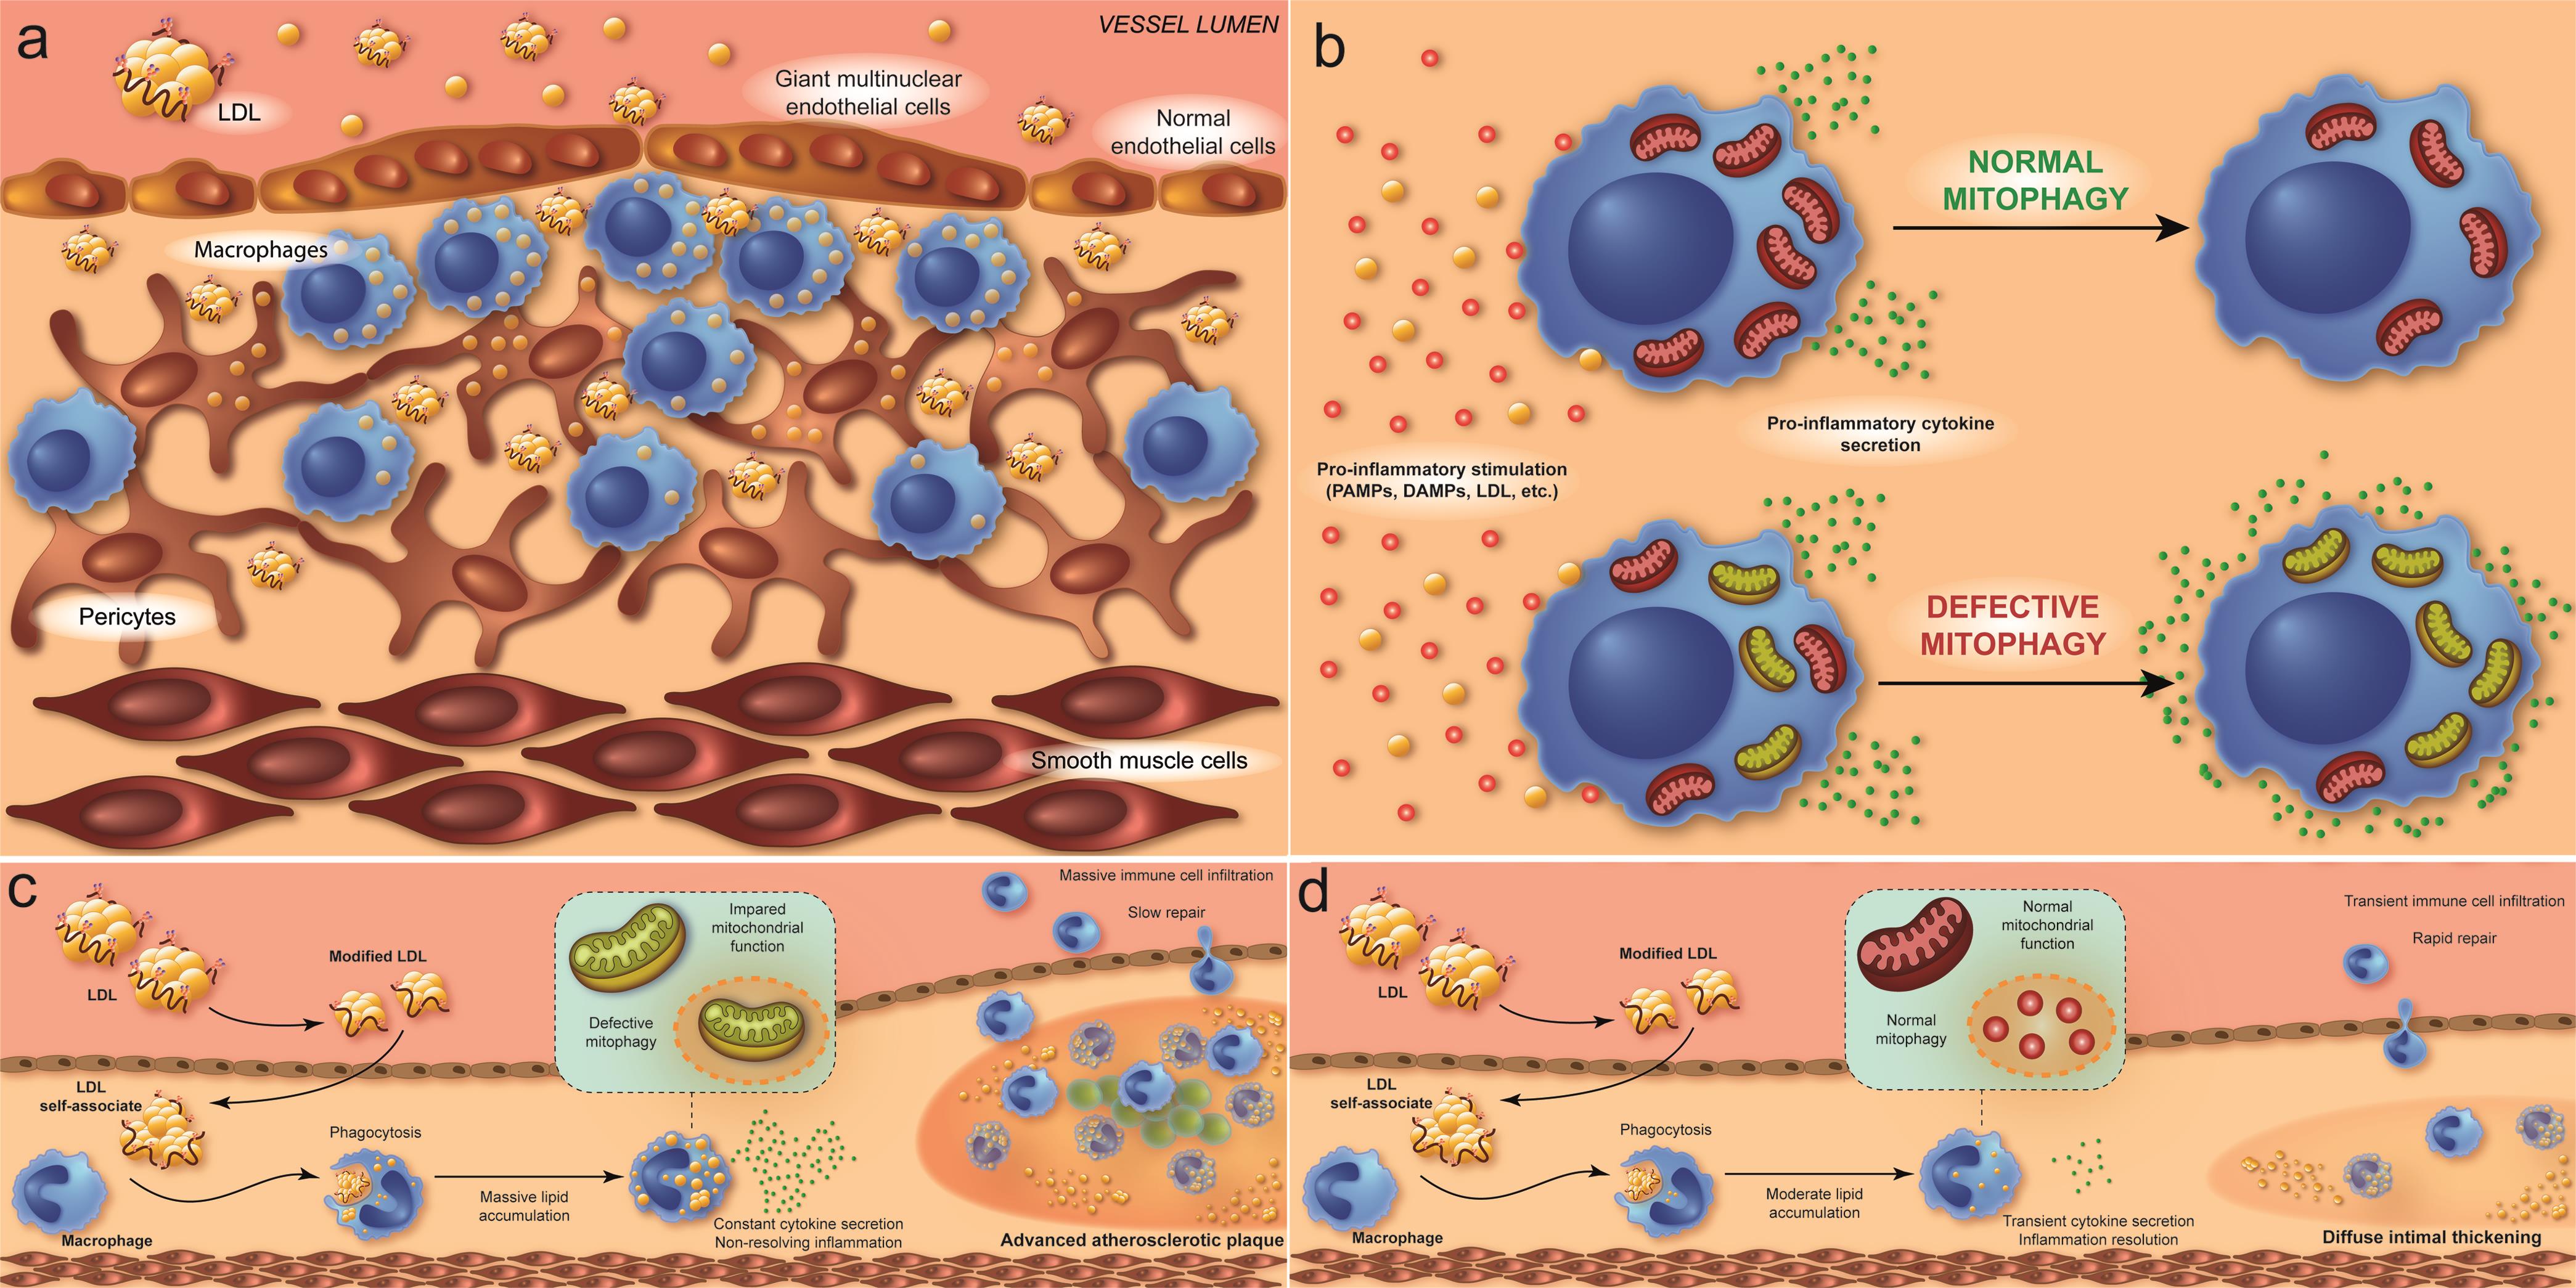 Proposed mechanisms of chronic inflammation development in the arterial wall during atherogenesis and atherosclerotic lesion formation, which is associated with defective mitophagy due to mtDNA mutations.